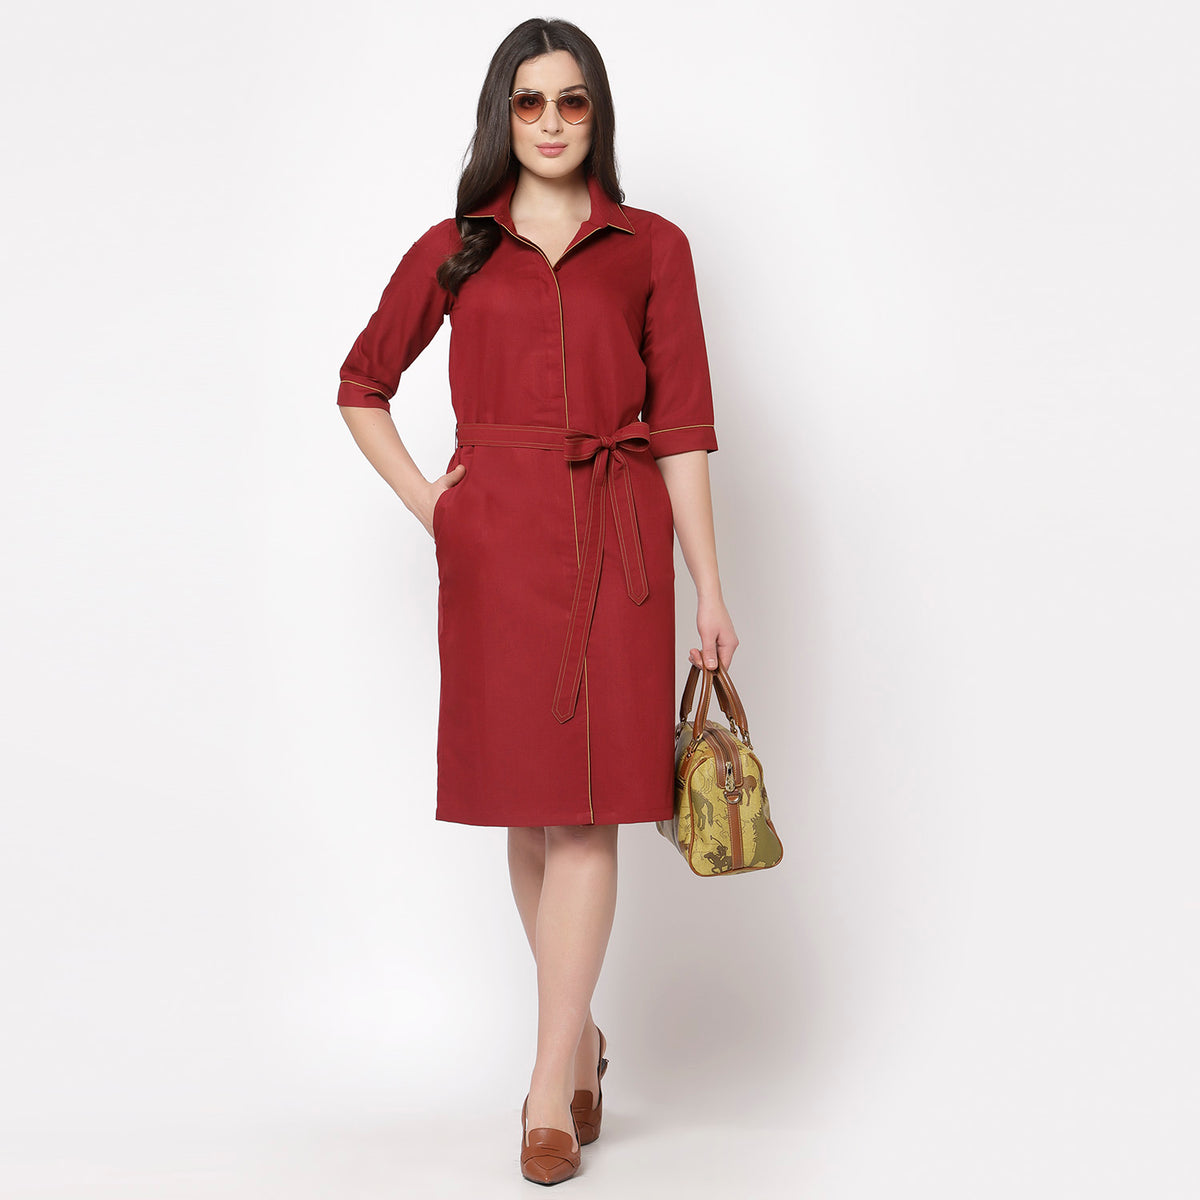 Red Dress With Belt and Brown Biping